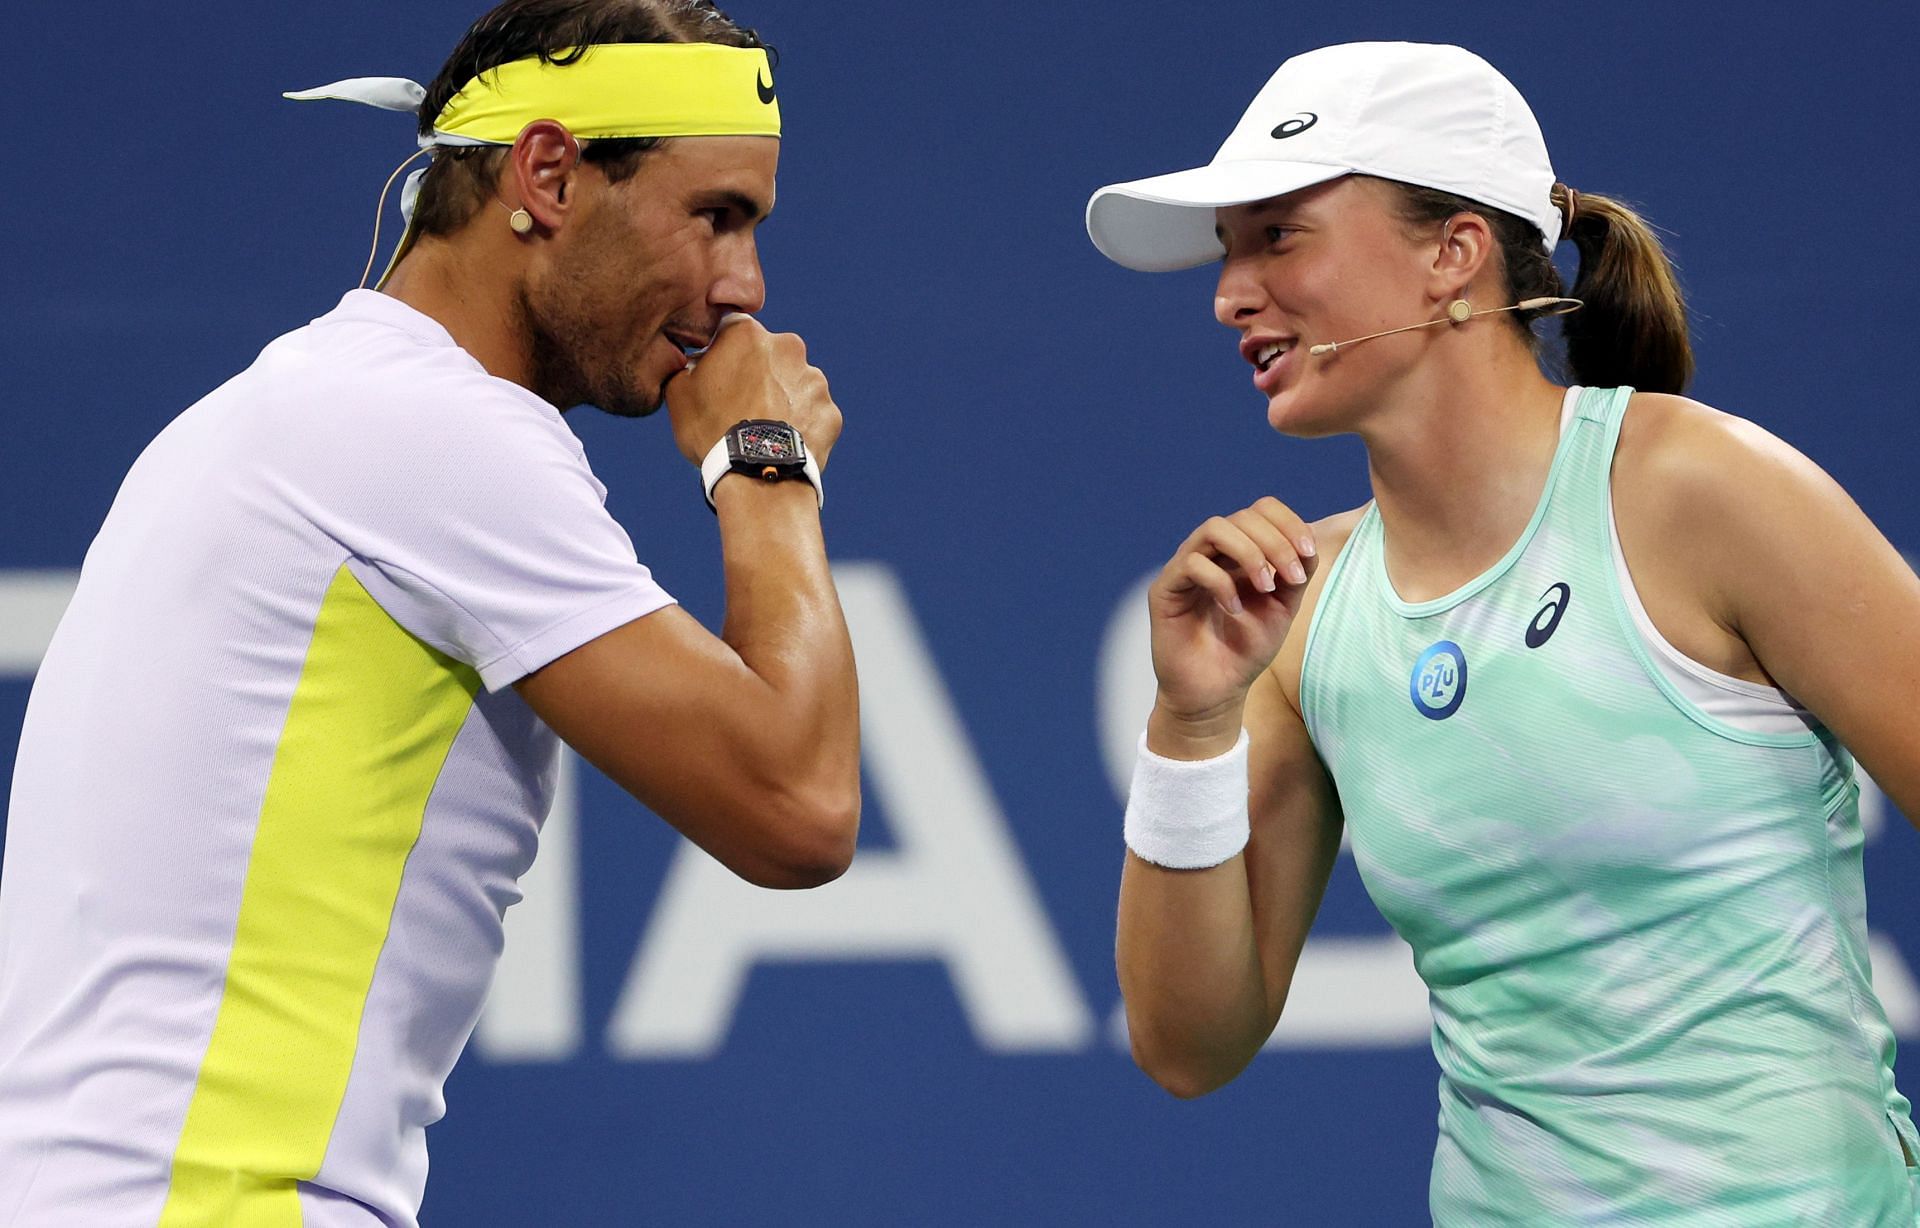 Rafael Nadal and Iga Swiatek pictured at the 2022 US Open